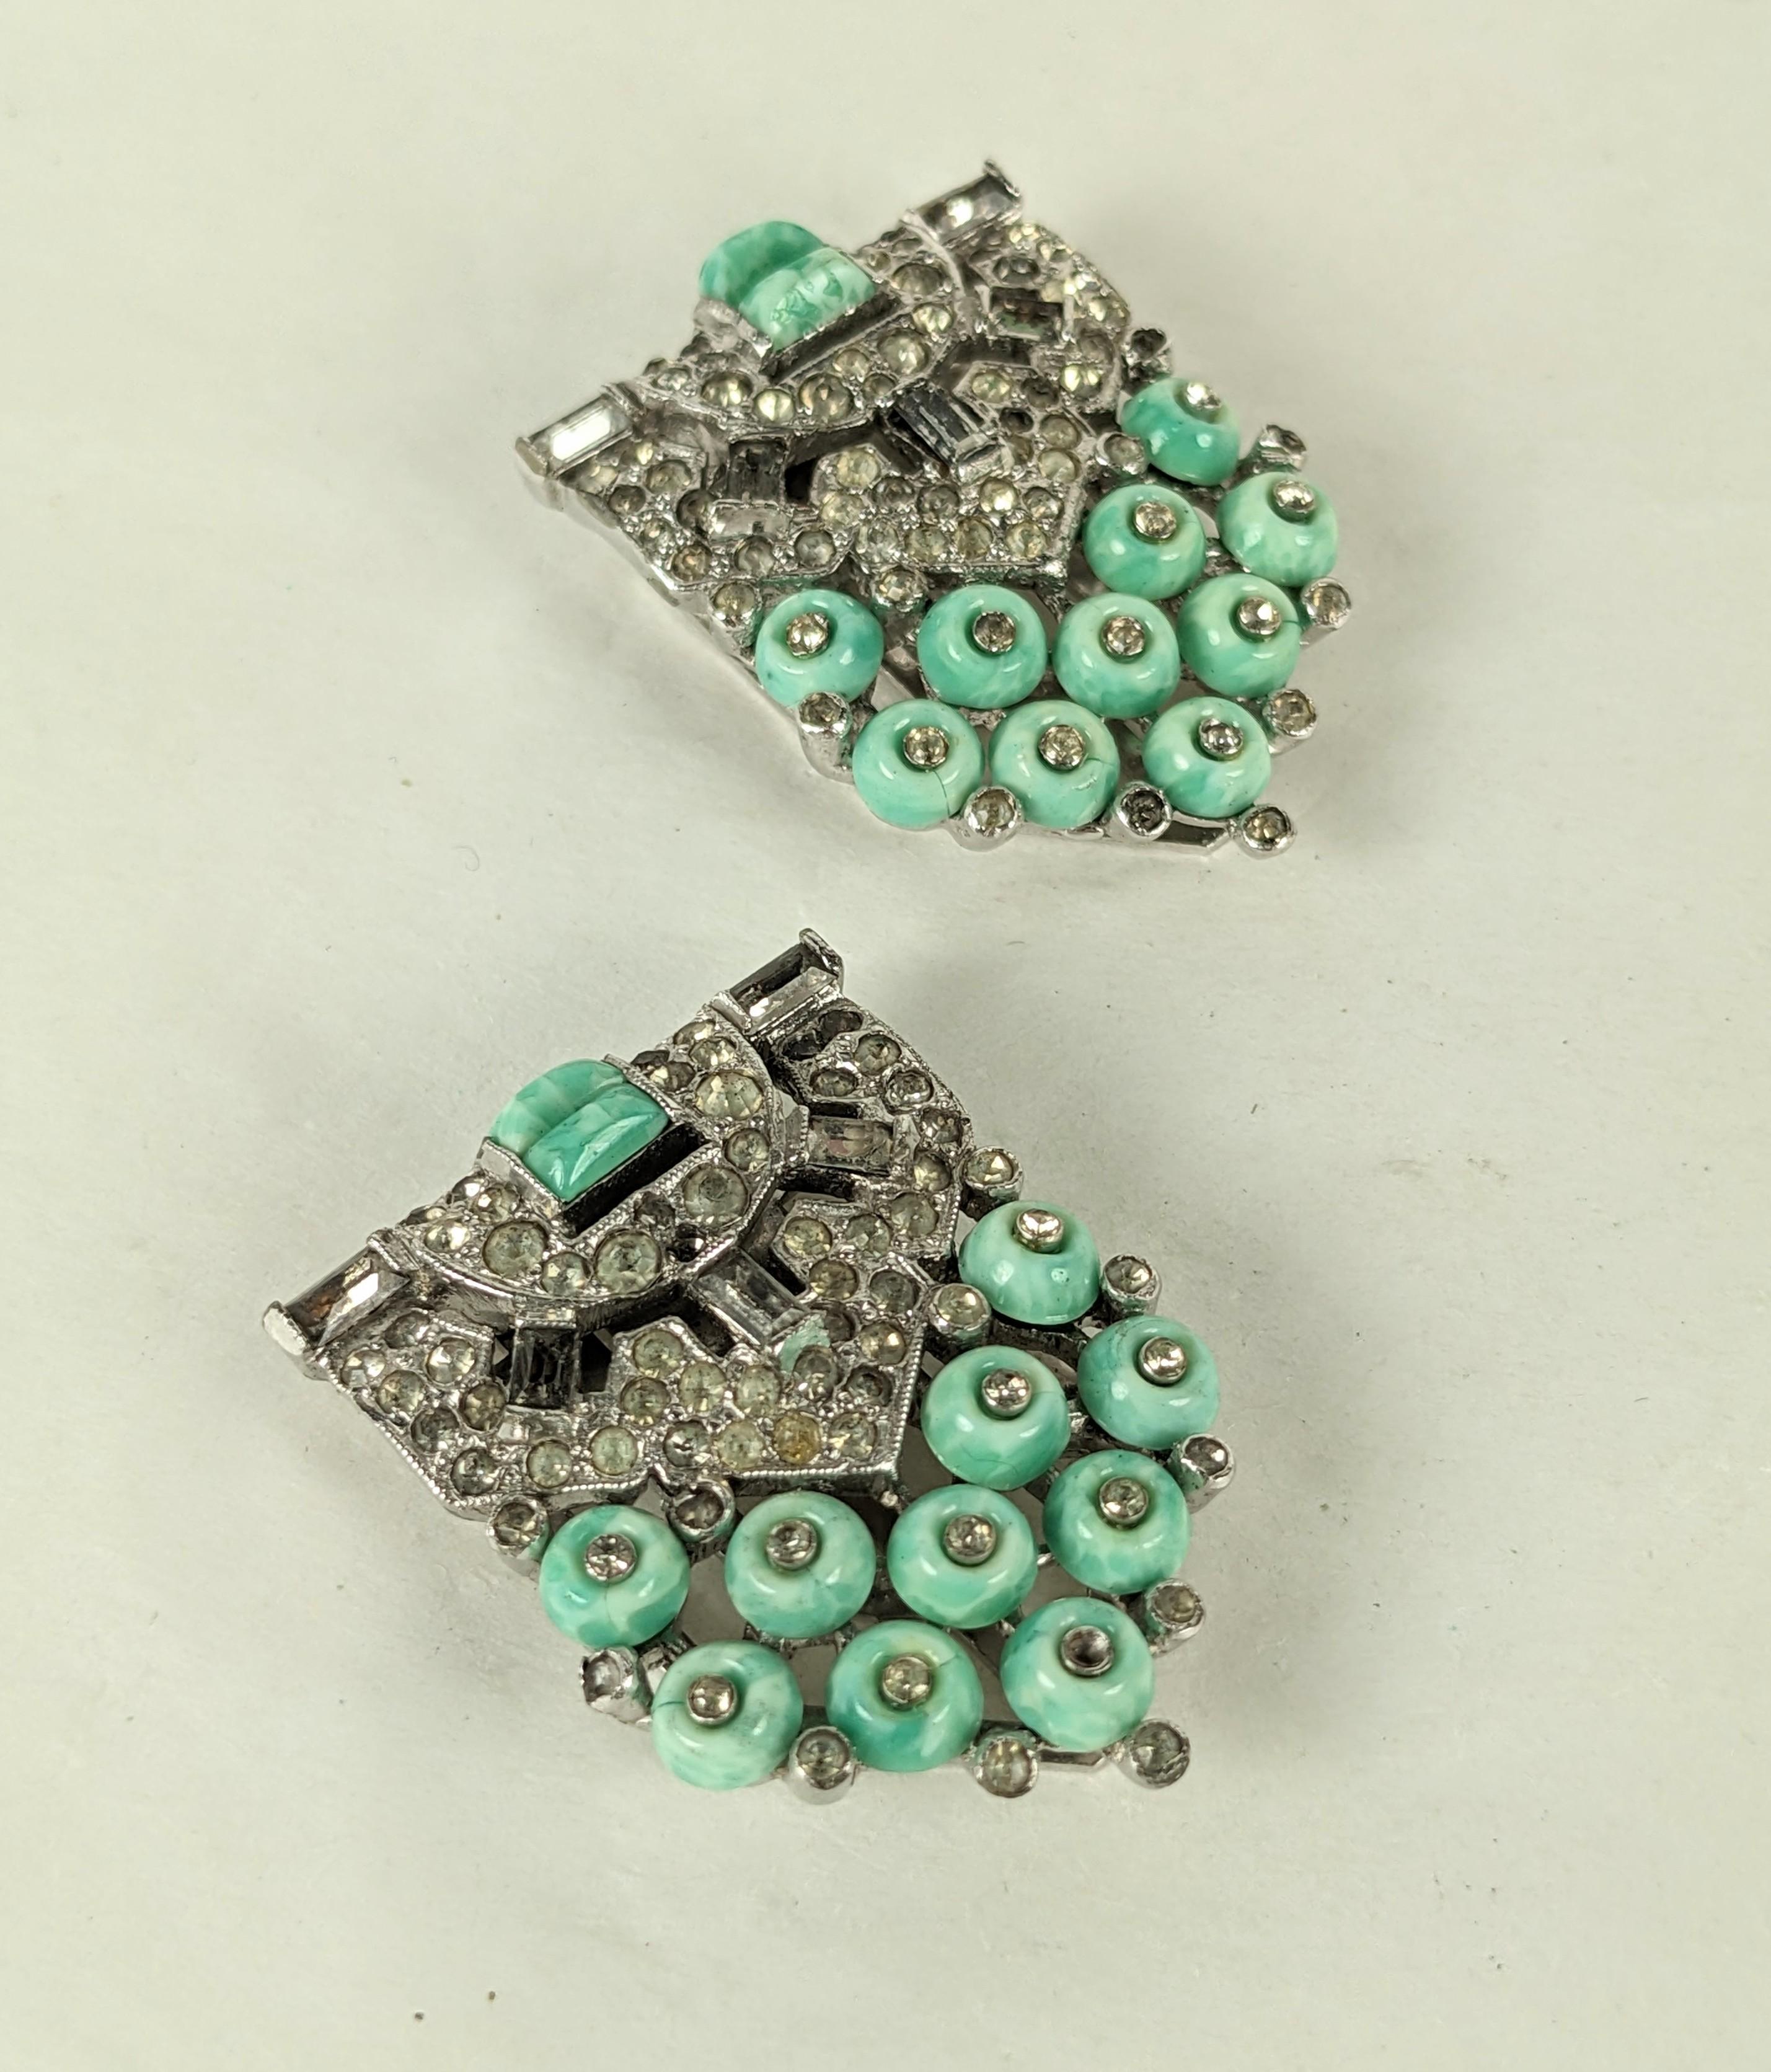 Trifari Art Deco Clips, KTF by Alfred Phillipe from the 1930's. High Art Design with faux pate de verre amazonites and crystals in the Cartier style set in rhodium. 1.25